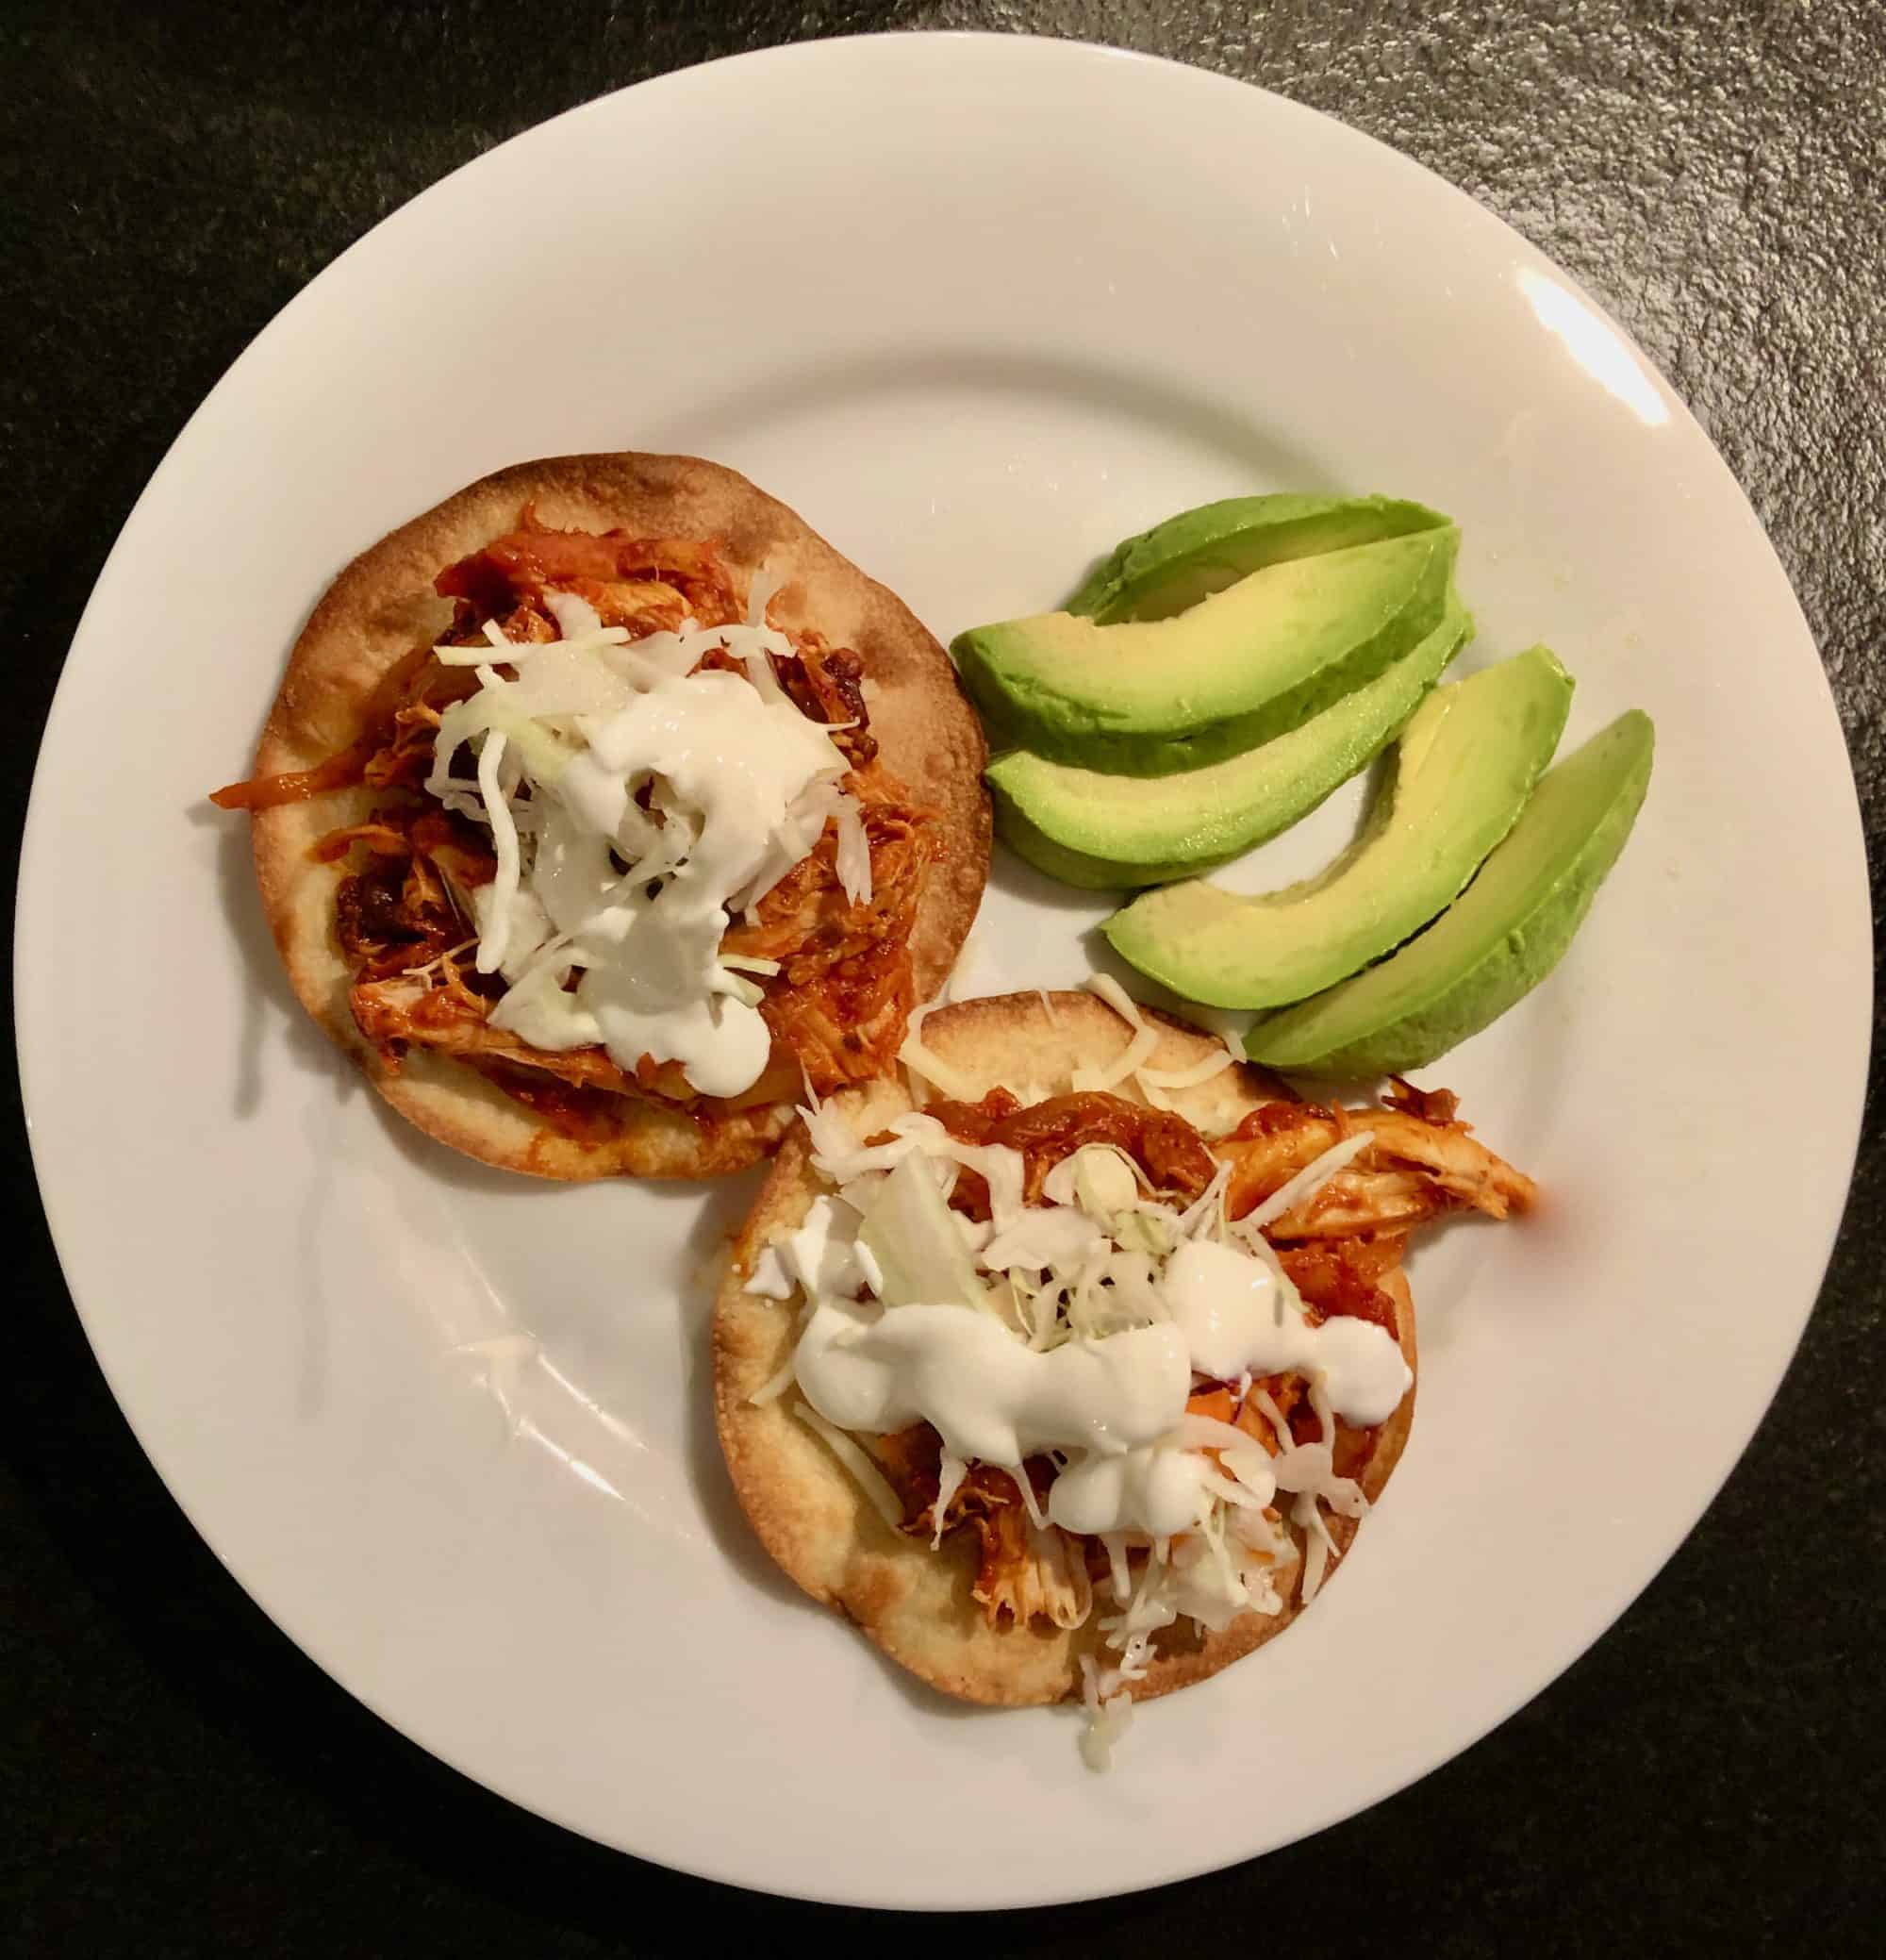 It’s Tostada Tuesday!  Celebrate with Pulled Chicken Tostadas